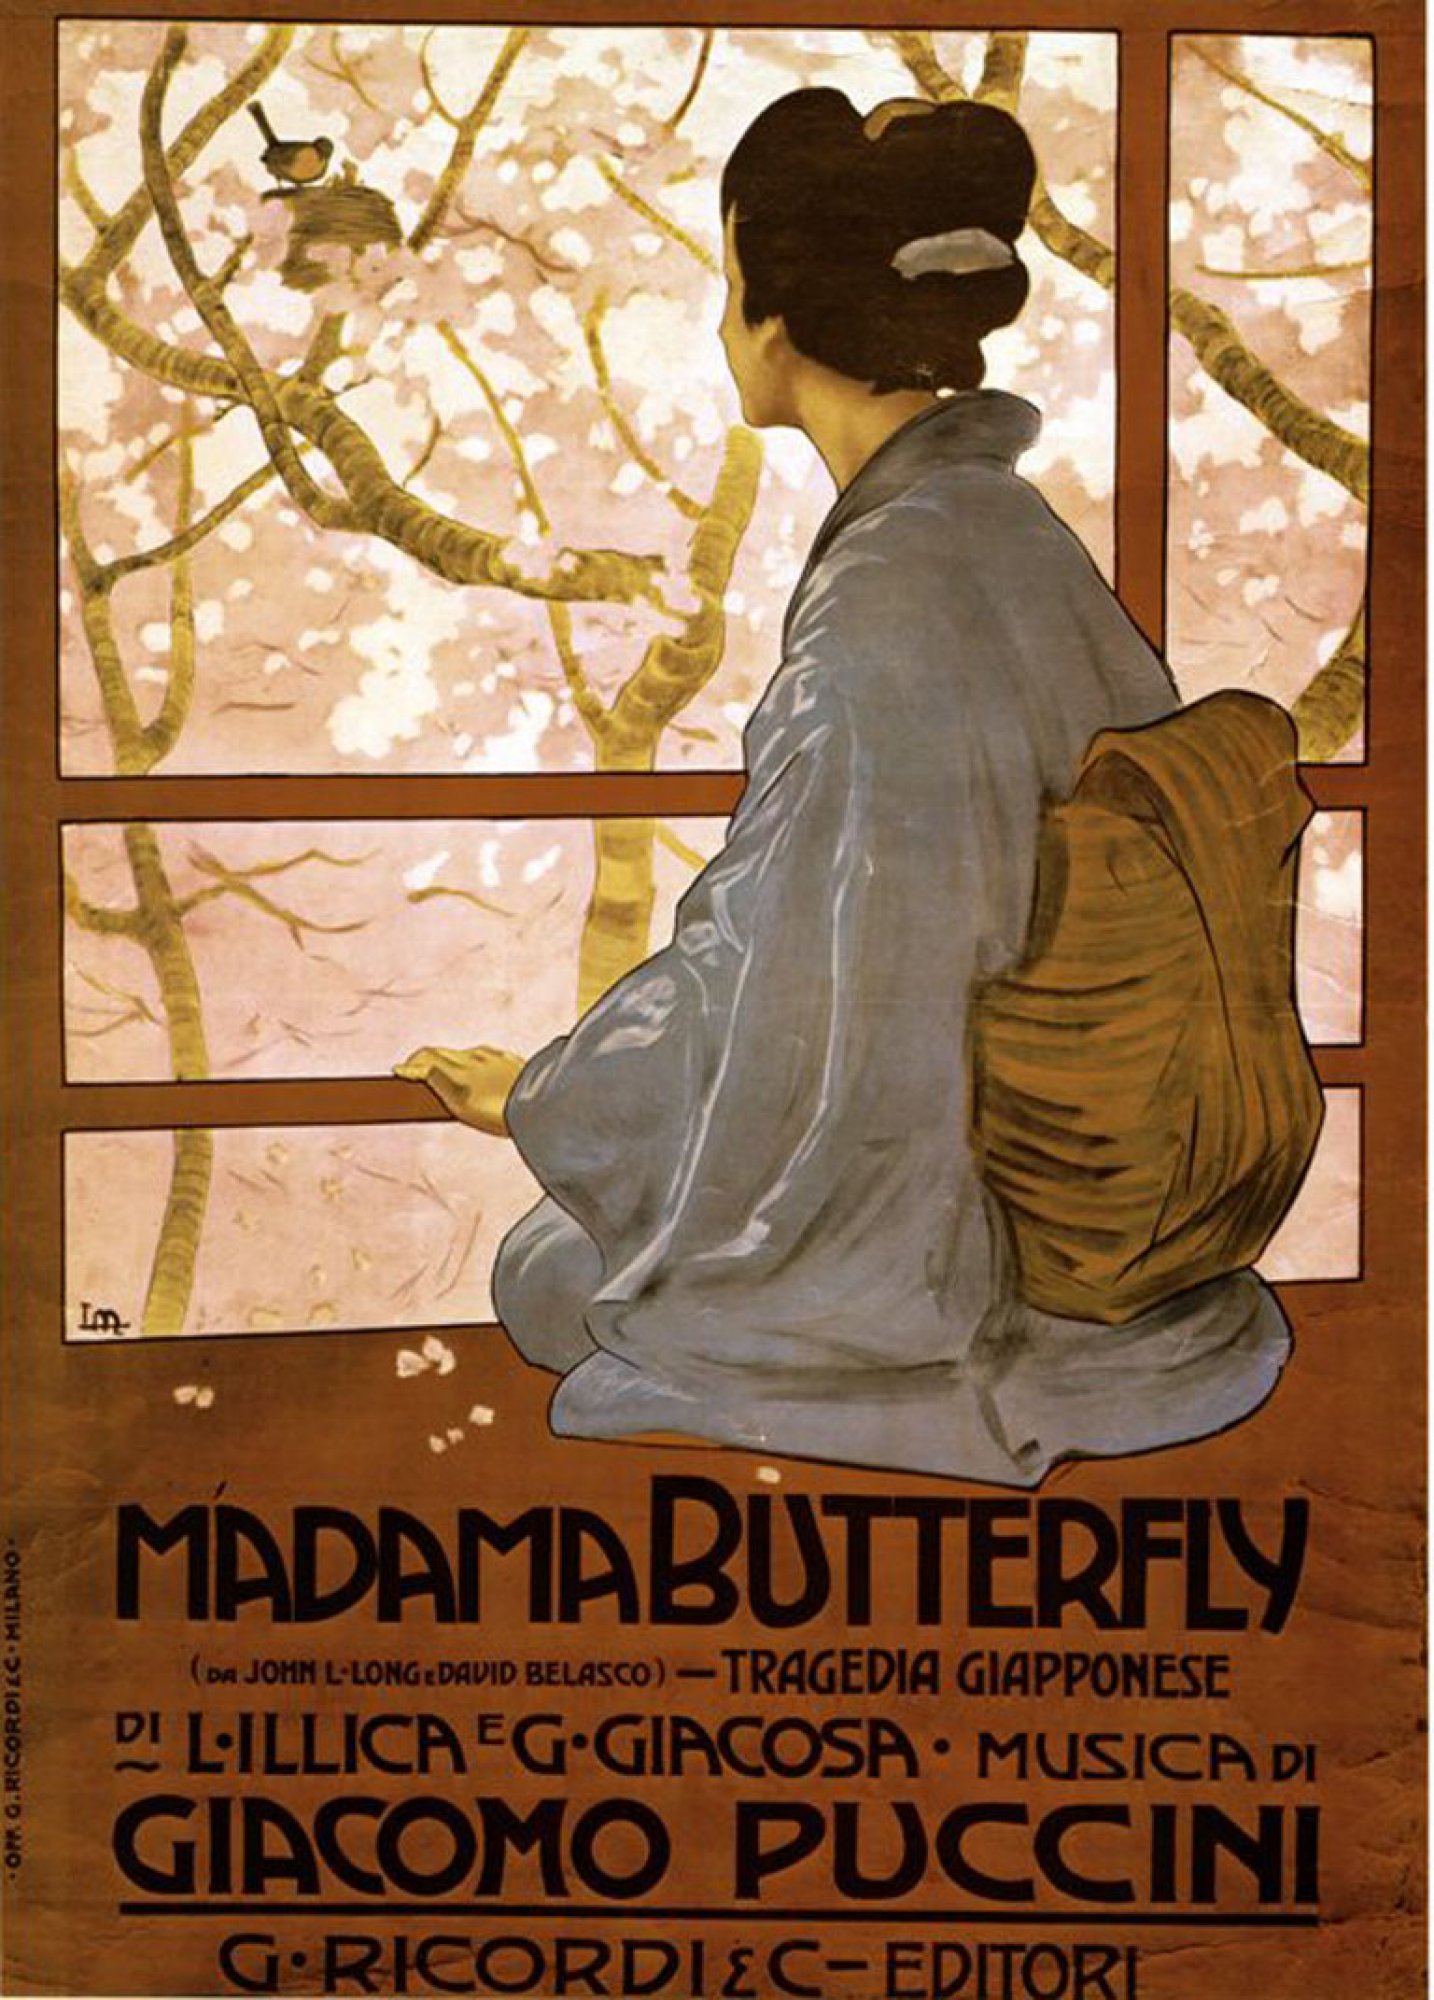 Madama Butterfly by Giacomo Puccini - 2018